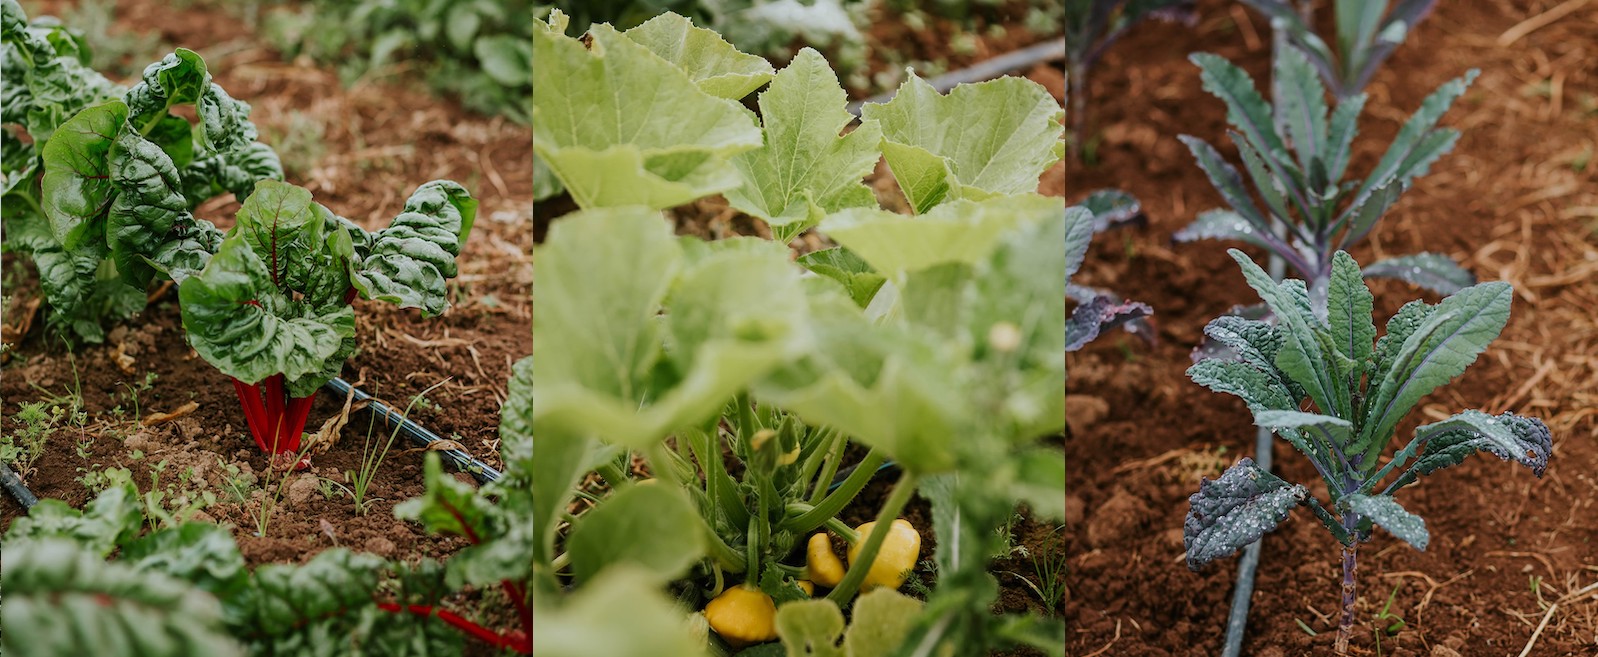 Three photos side by side. Left: Bright green leaves and small red stalks of chard. Centre: Lighter green leaves and small yellow squash. Right: Plants with dark green leaves edged with purple.